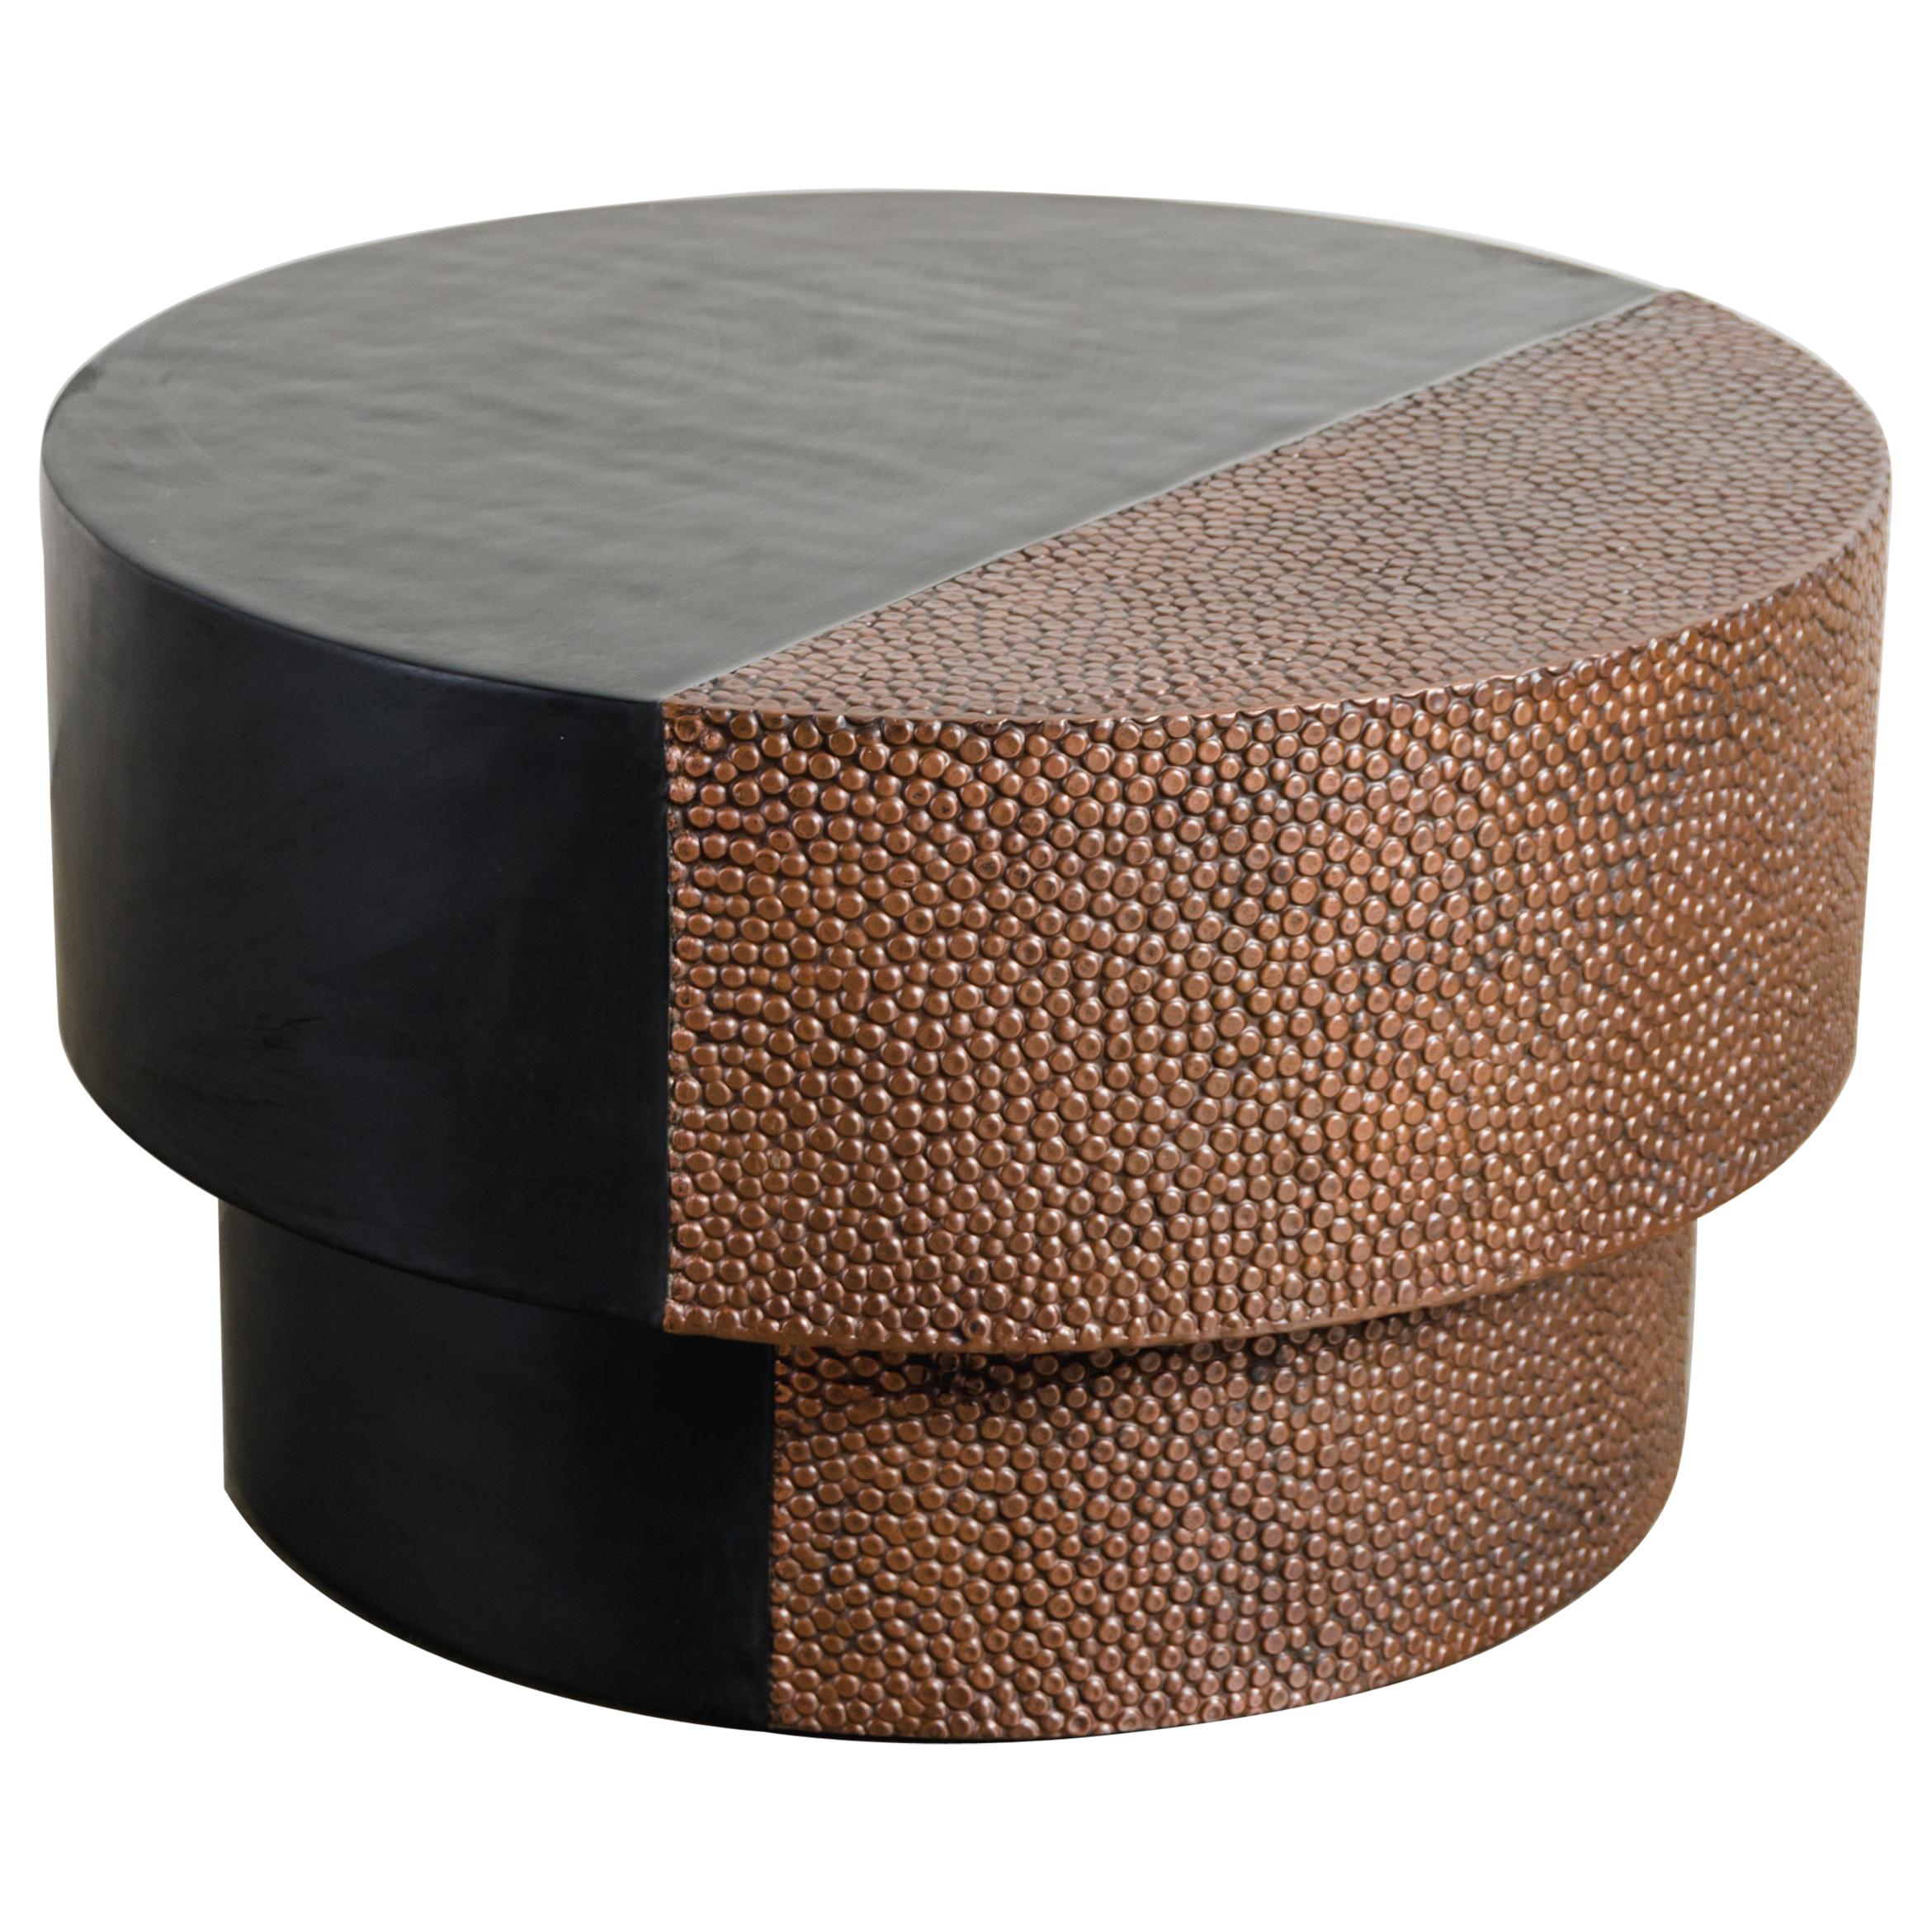 Drum Table with Toad Skin Design, Copper and Black Lacquer by Robert Kuo For Sale